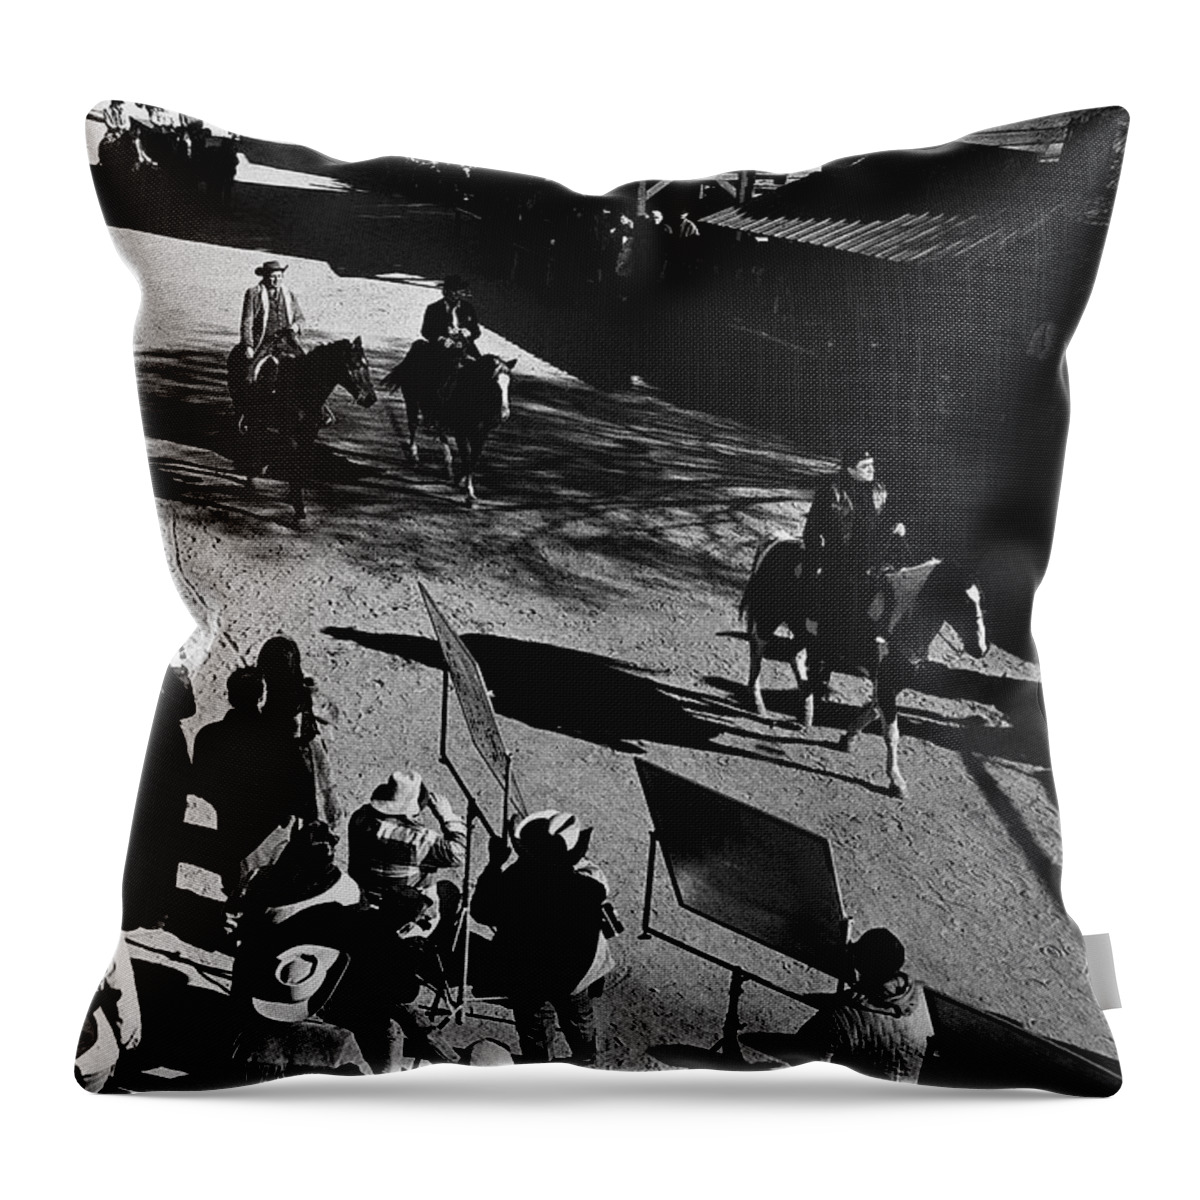 Johnny Cash Riding Horse Filming Promo Main Street Old Tucson Az A Gunfight Kirk Douglas A Boy Named Sue San Quentin Prison Concert Recorded By Granada Television Great Britain Throw Pillow featuring the photograph Johnny Cash riding horse filming promo main street Old Tucson Arizona 1971 by David Lee Guss